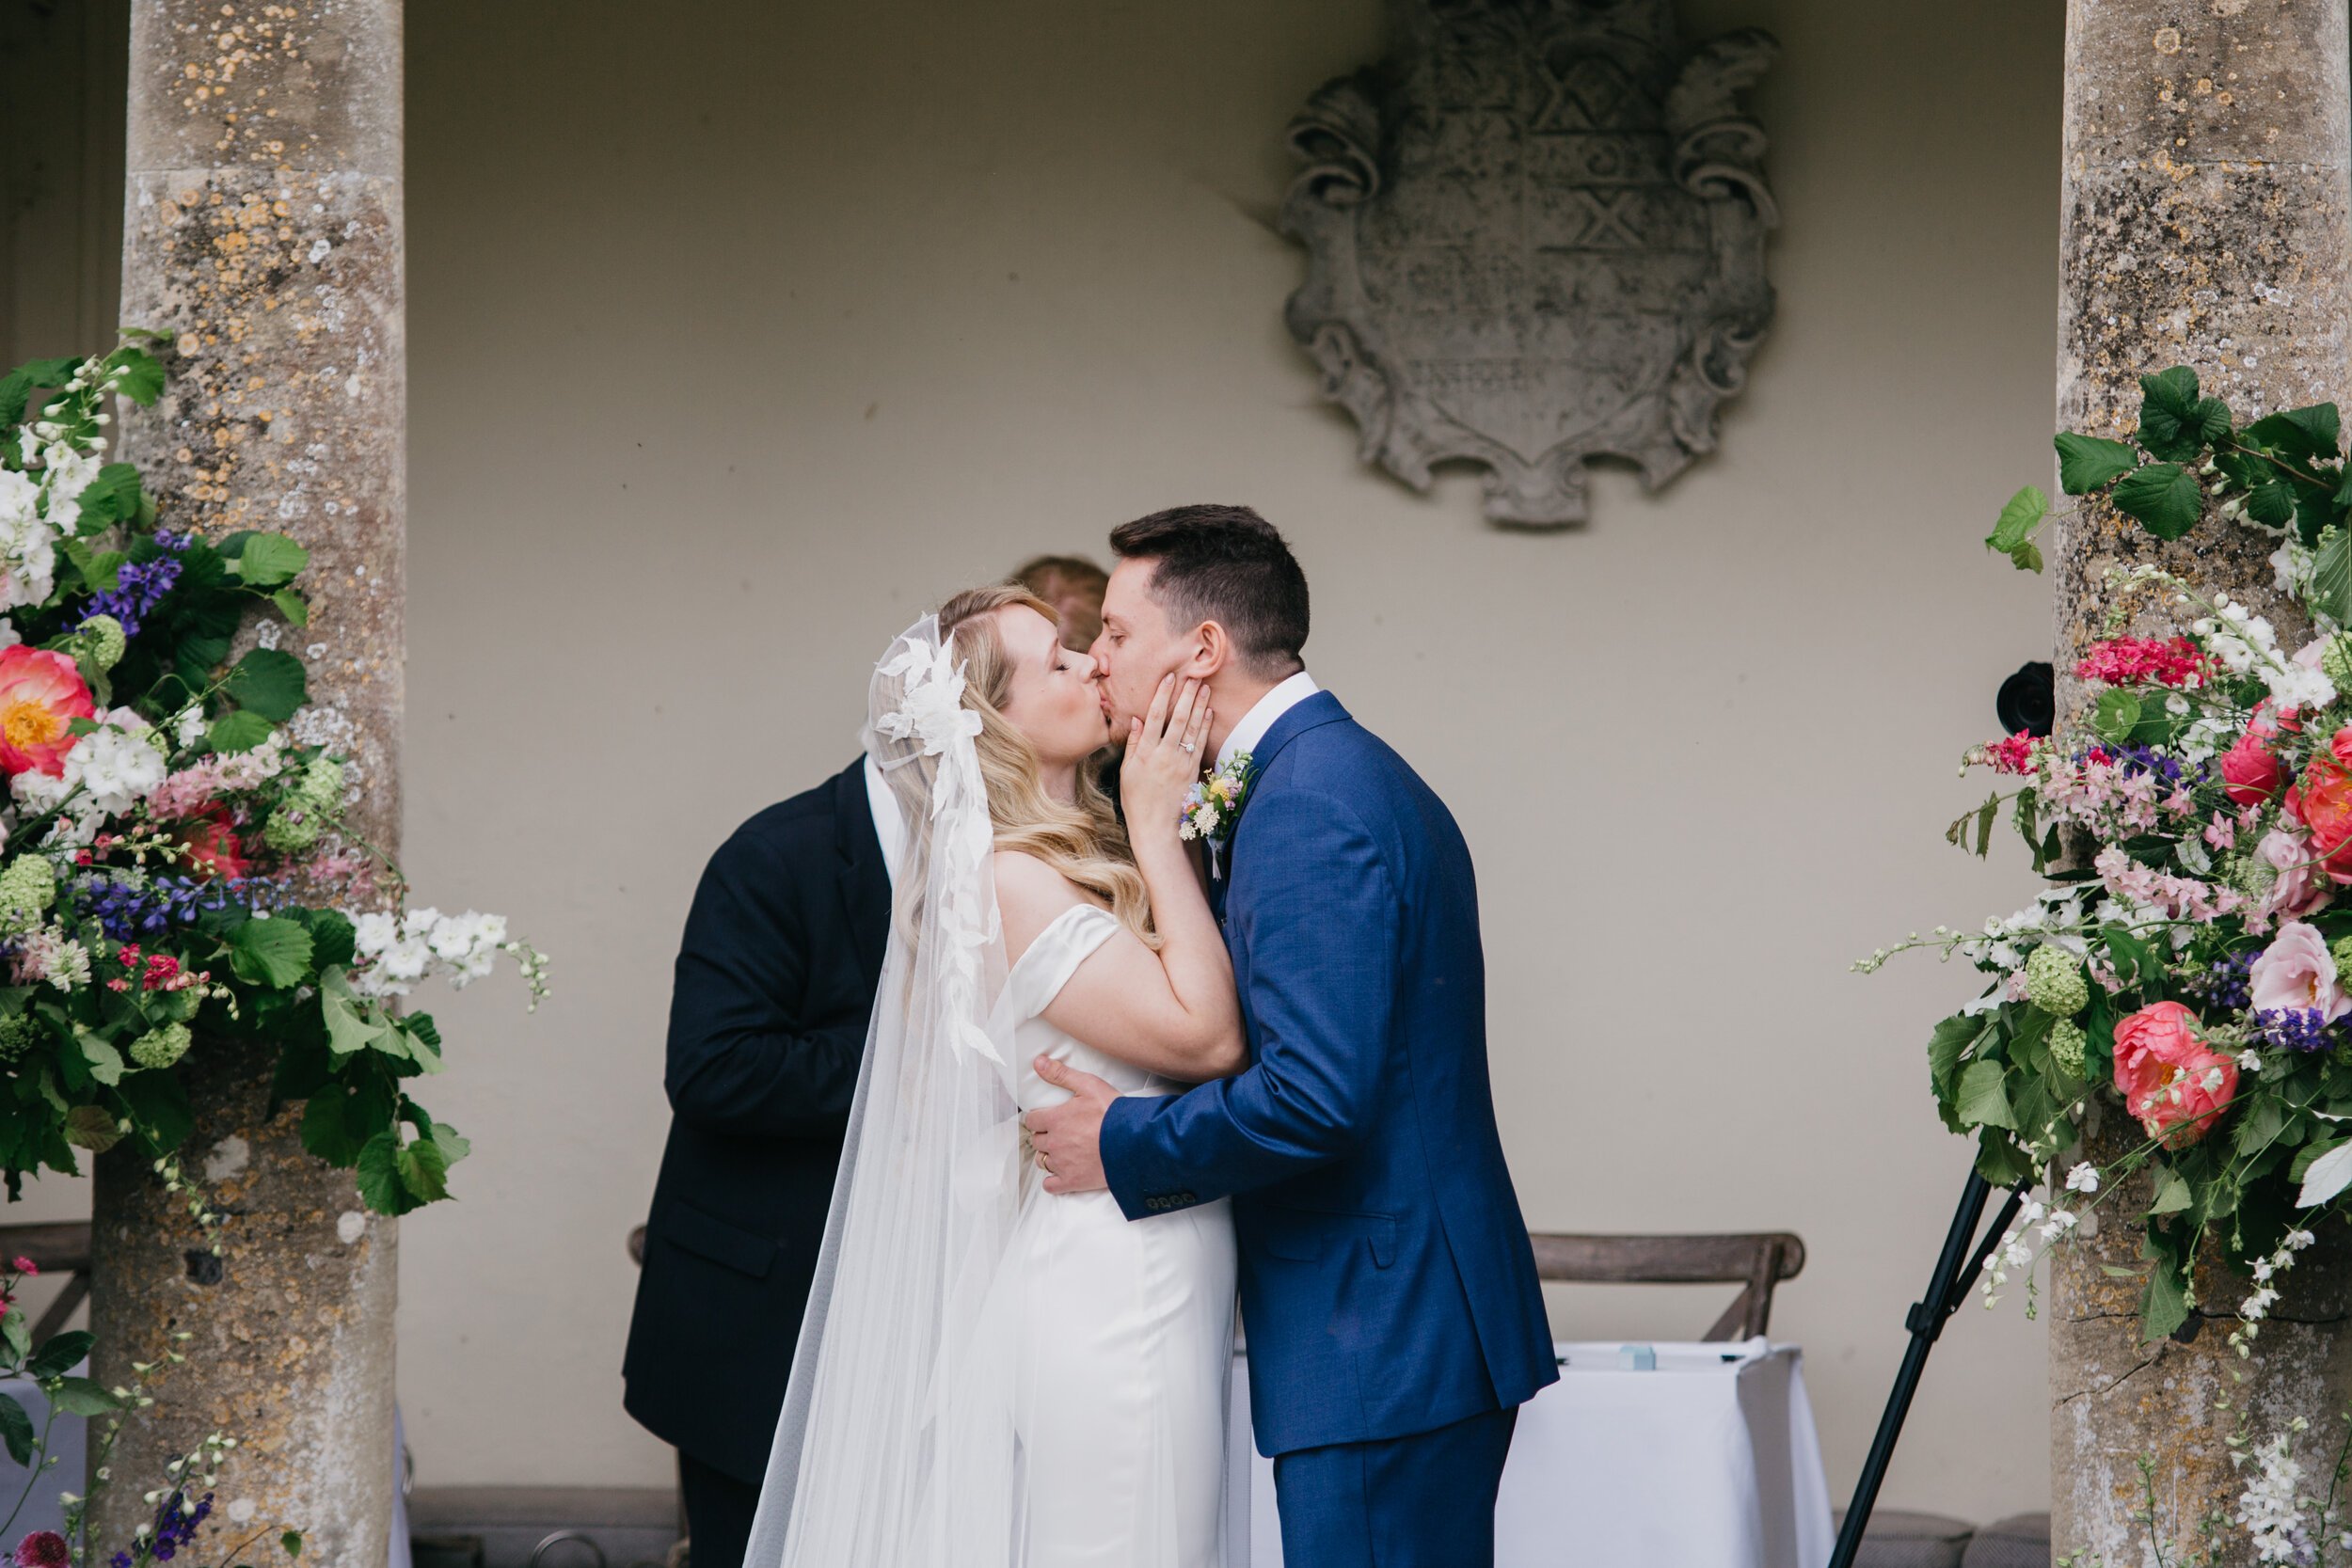 Beautiful bride Sophie wore a wedding dress and veil by Halfpenny London